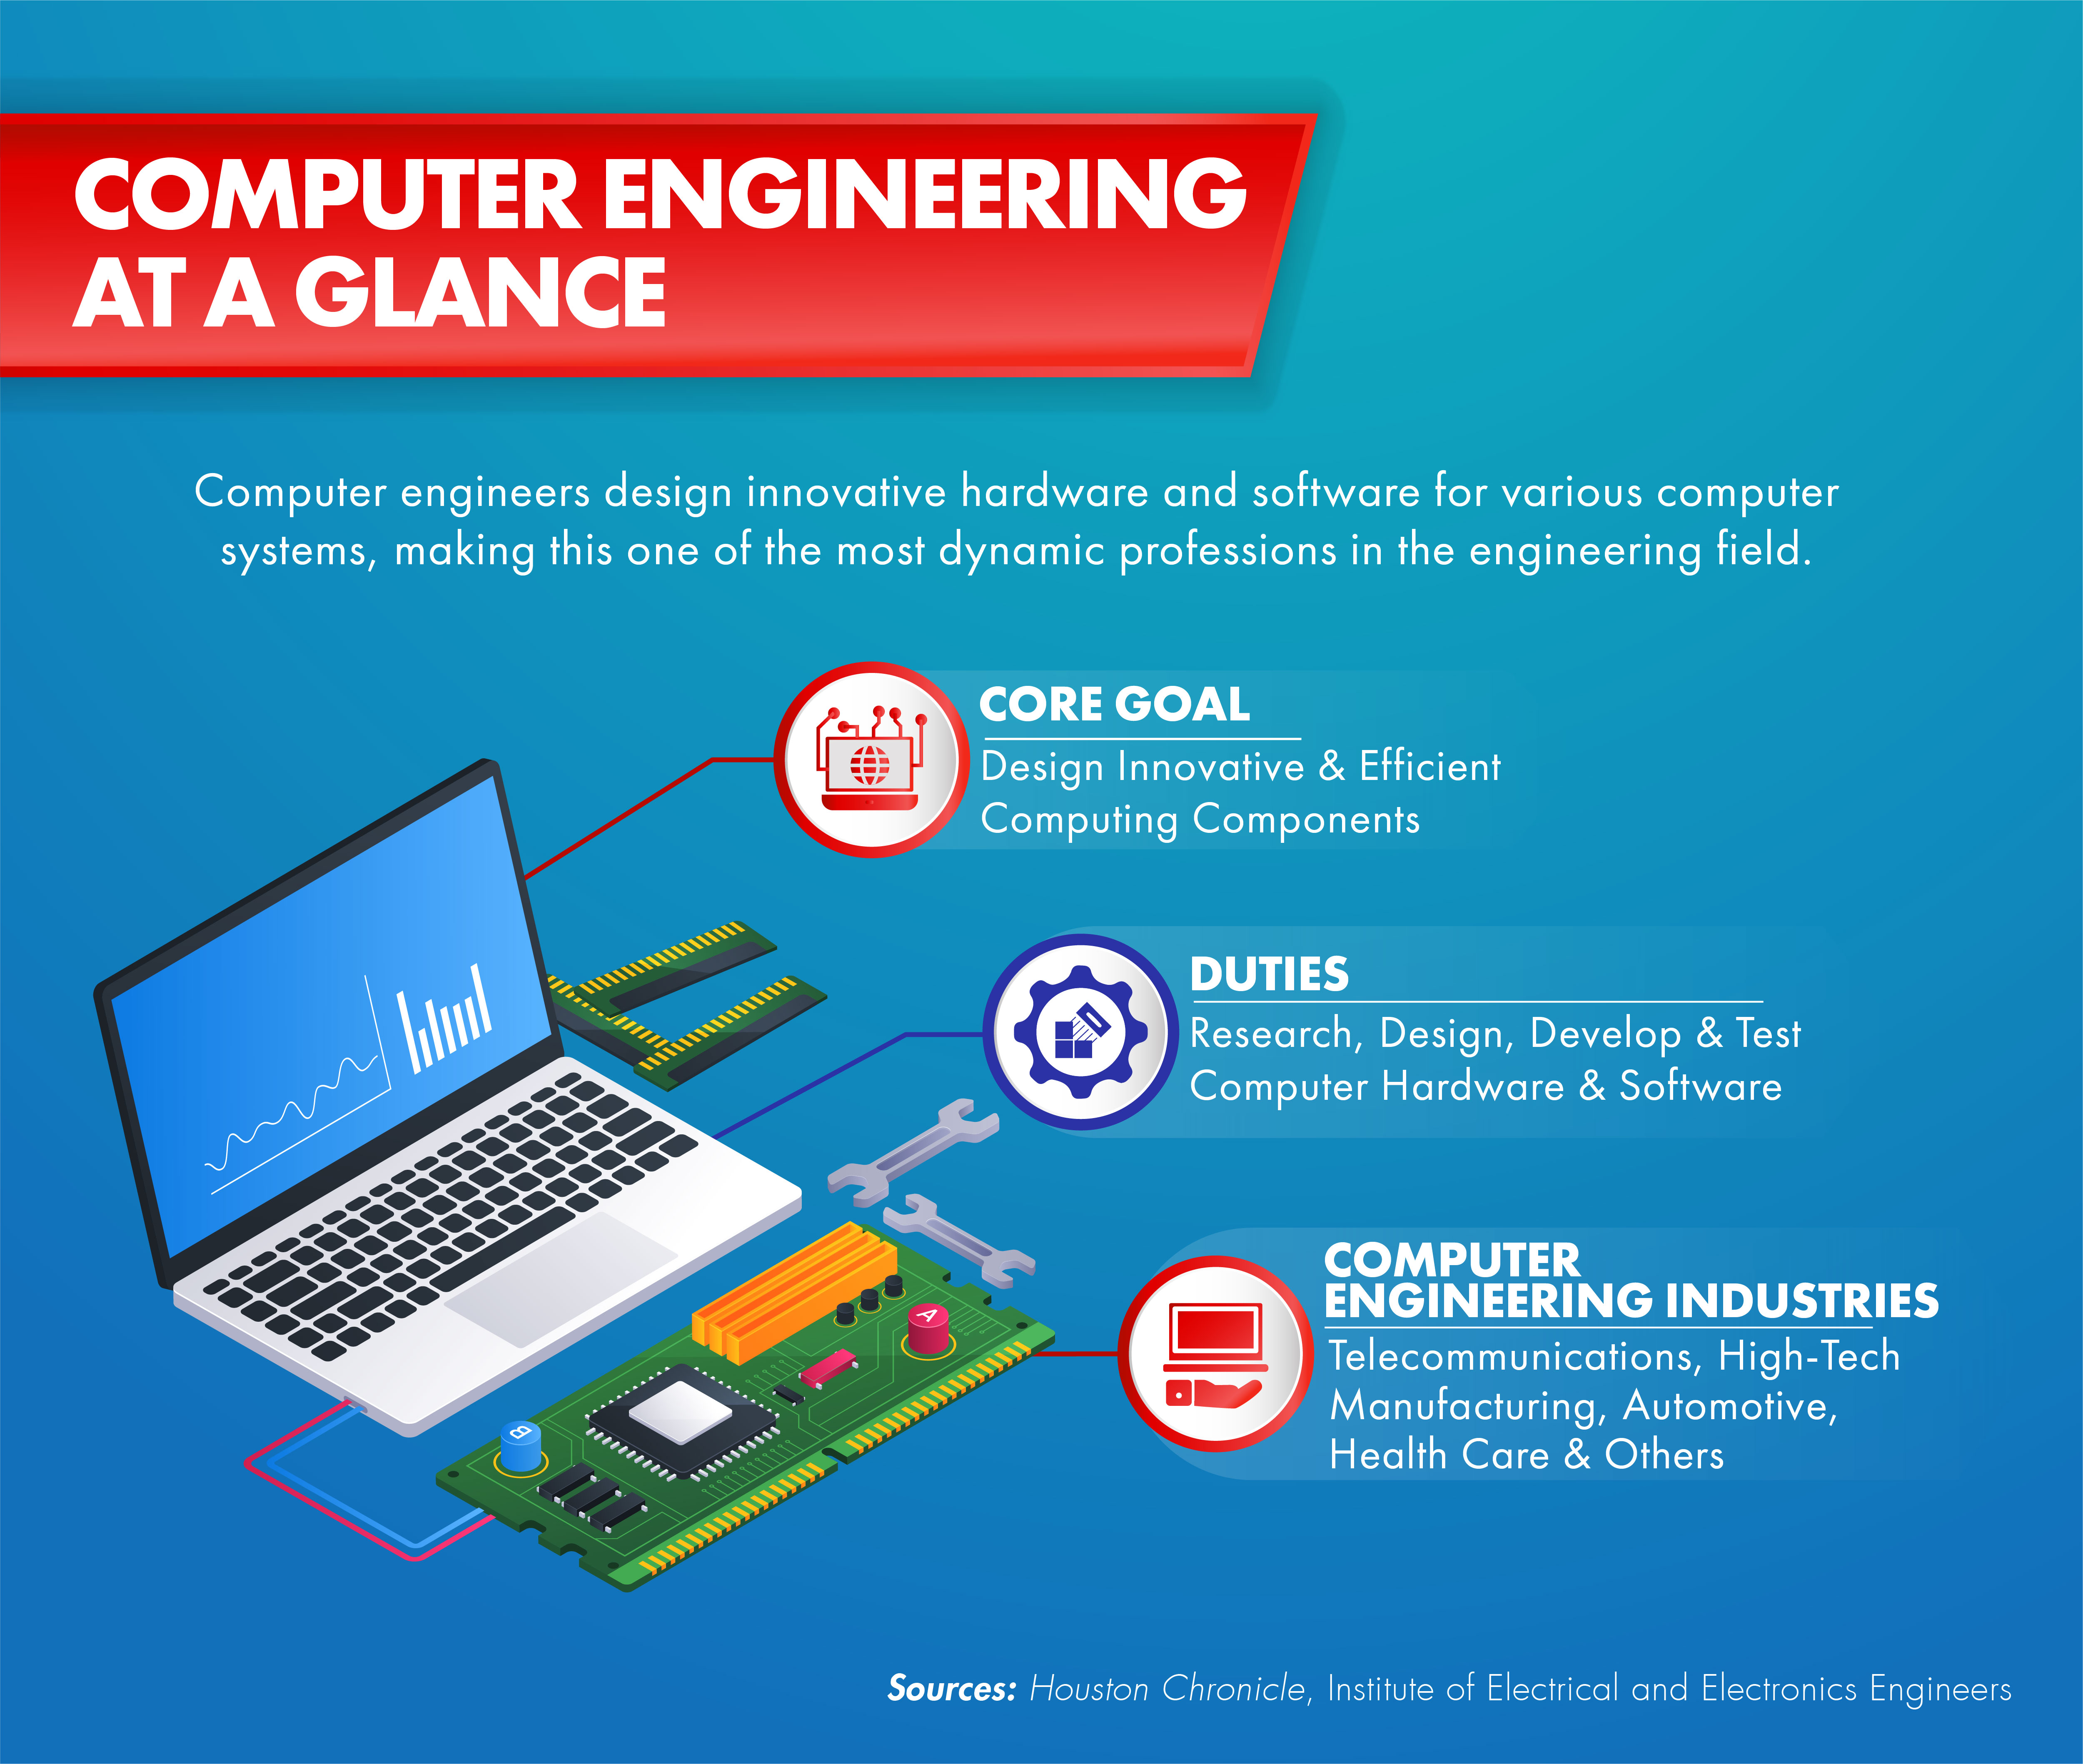 How To Create An Infographic On Hardware And Software